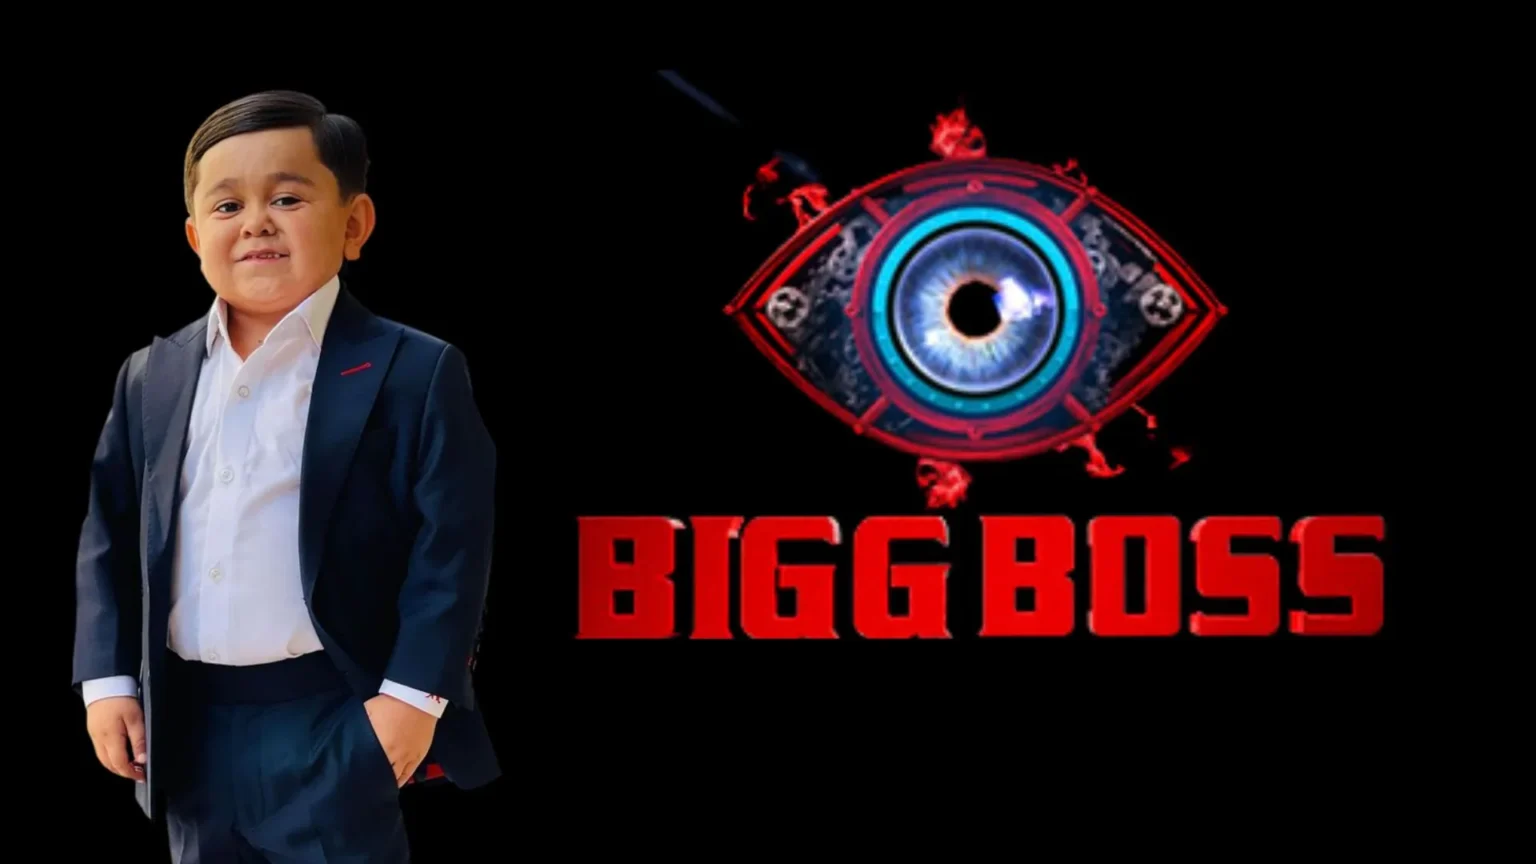 Bigg Boss 16: Abdu Rozik is the new captain of the house